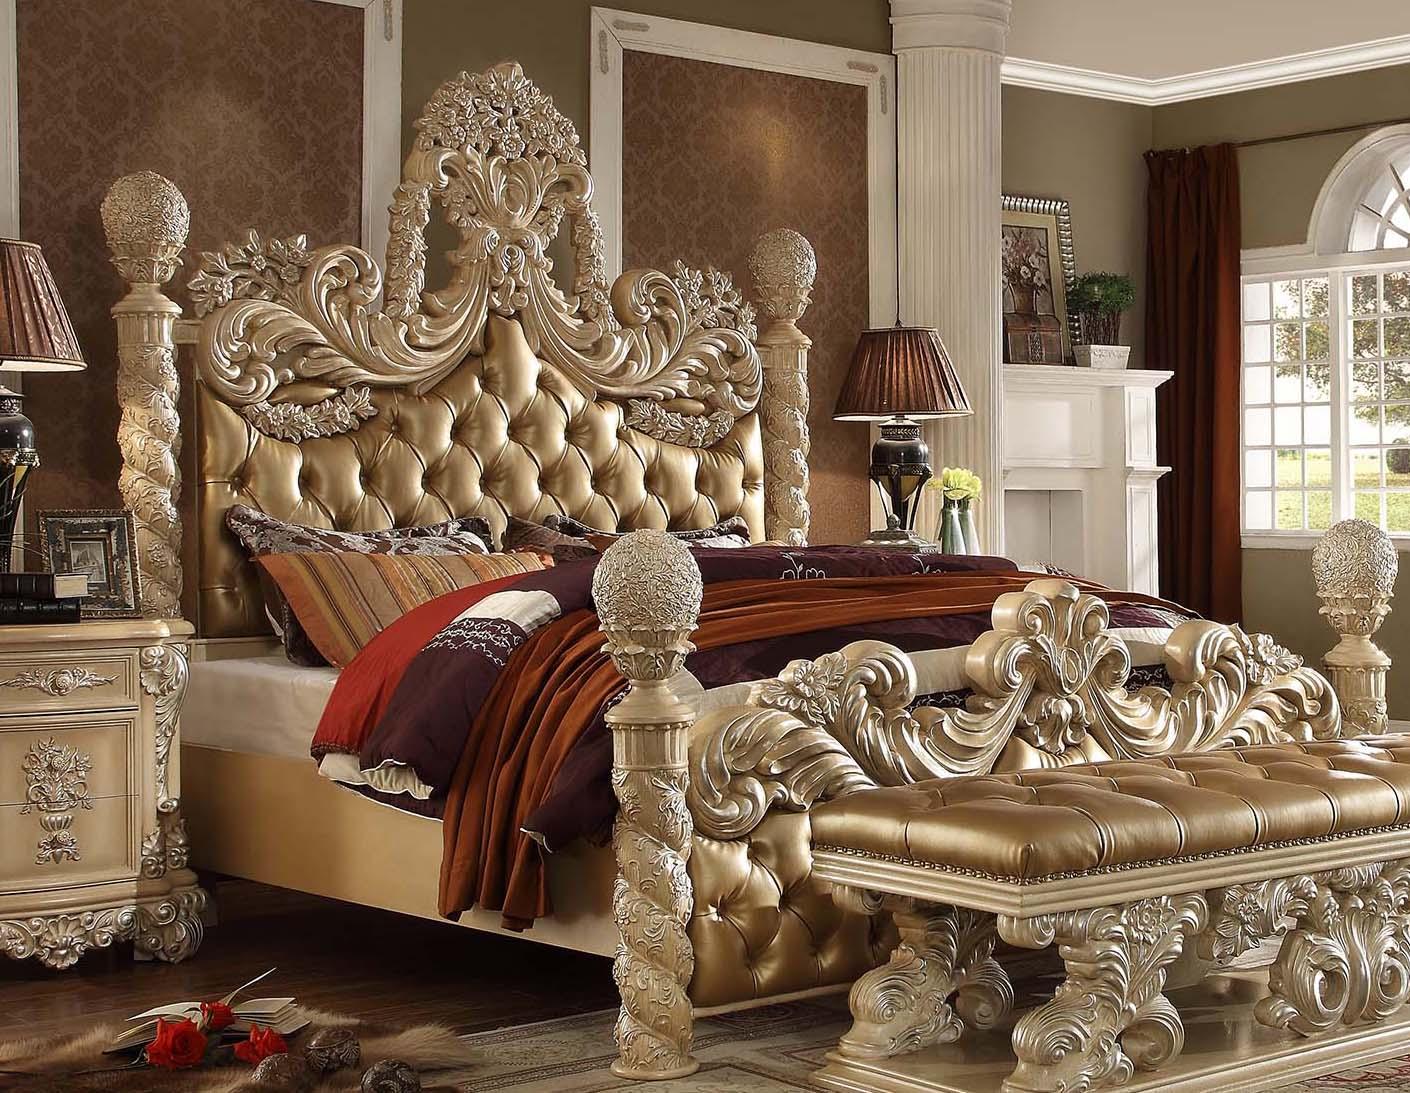 

    
Golden Khaki CAL King Poster Bed Traditional Homey Design HD-7266
